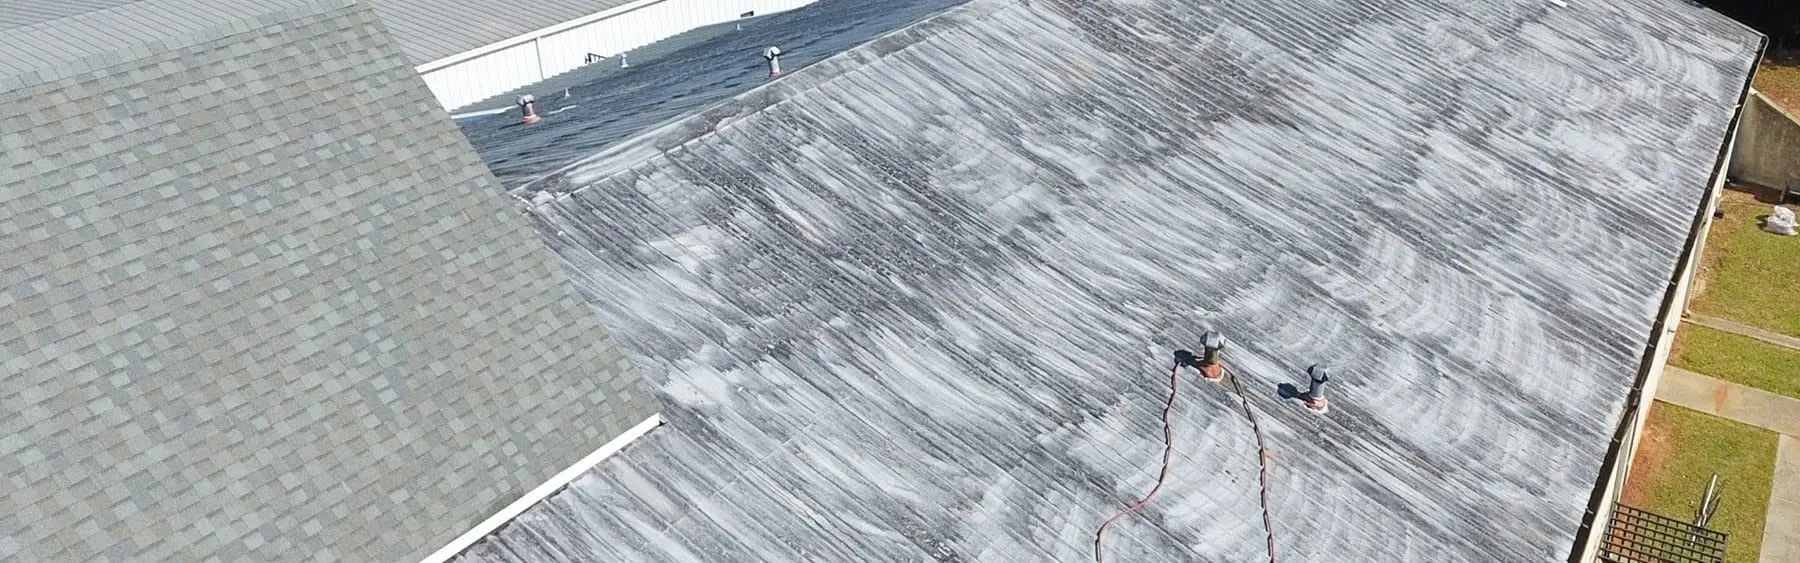 Commercial Roof Coating: Best Solution